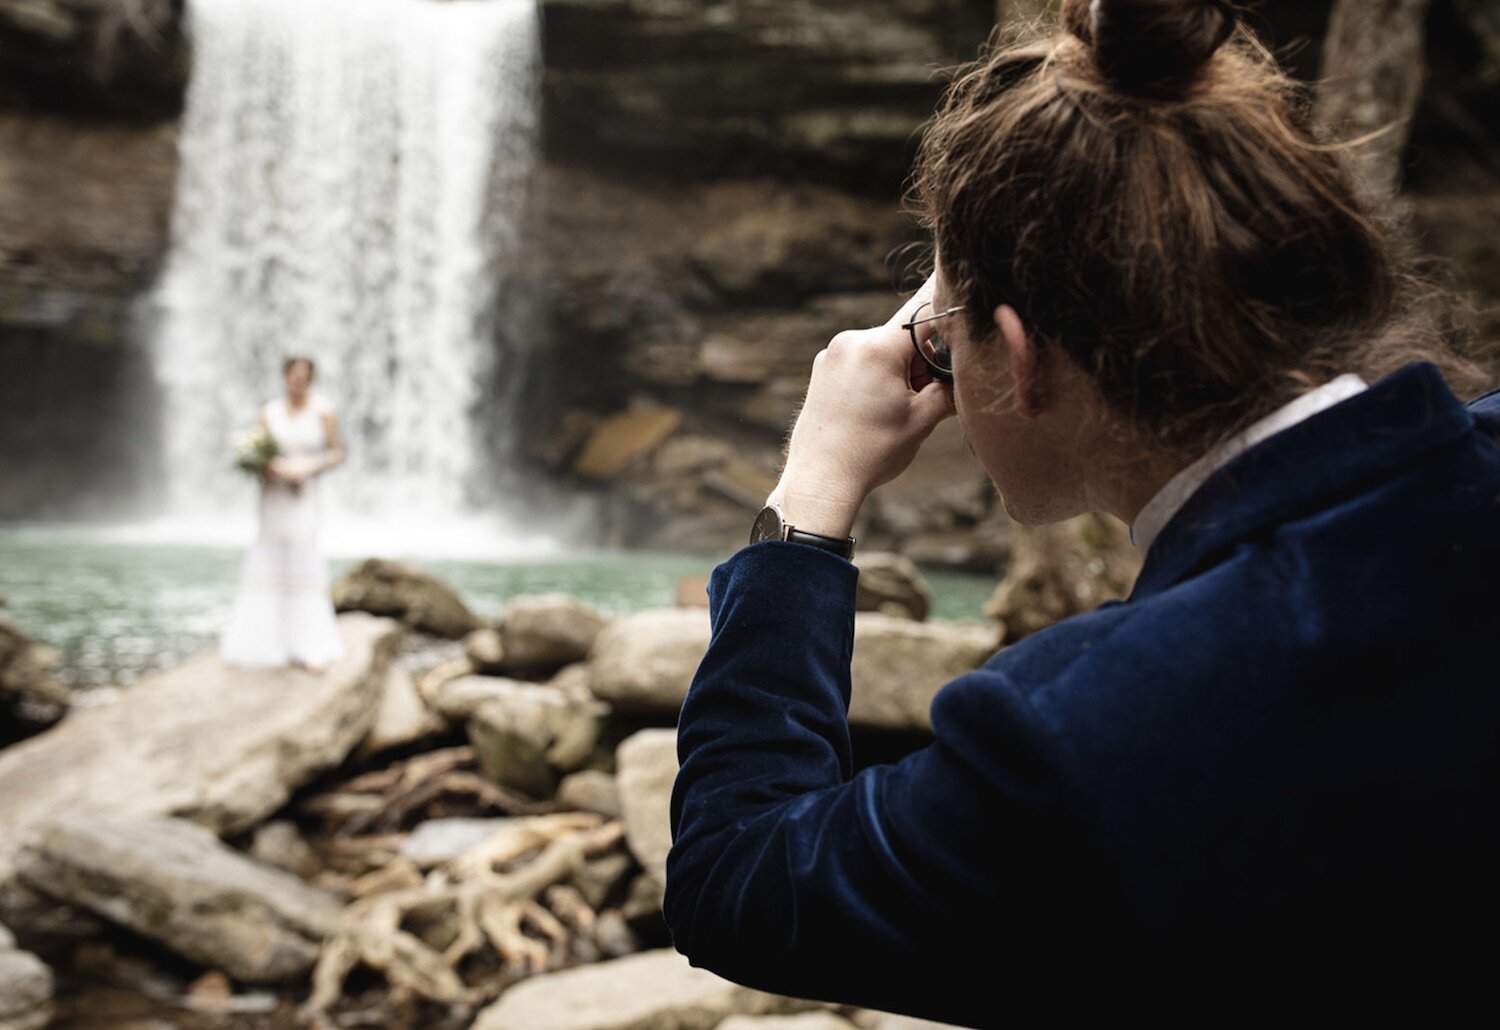 Groom takes a photo of the bride as she stands in front of a breathtaking waterfalls